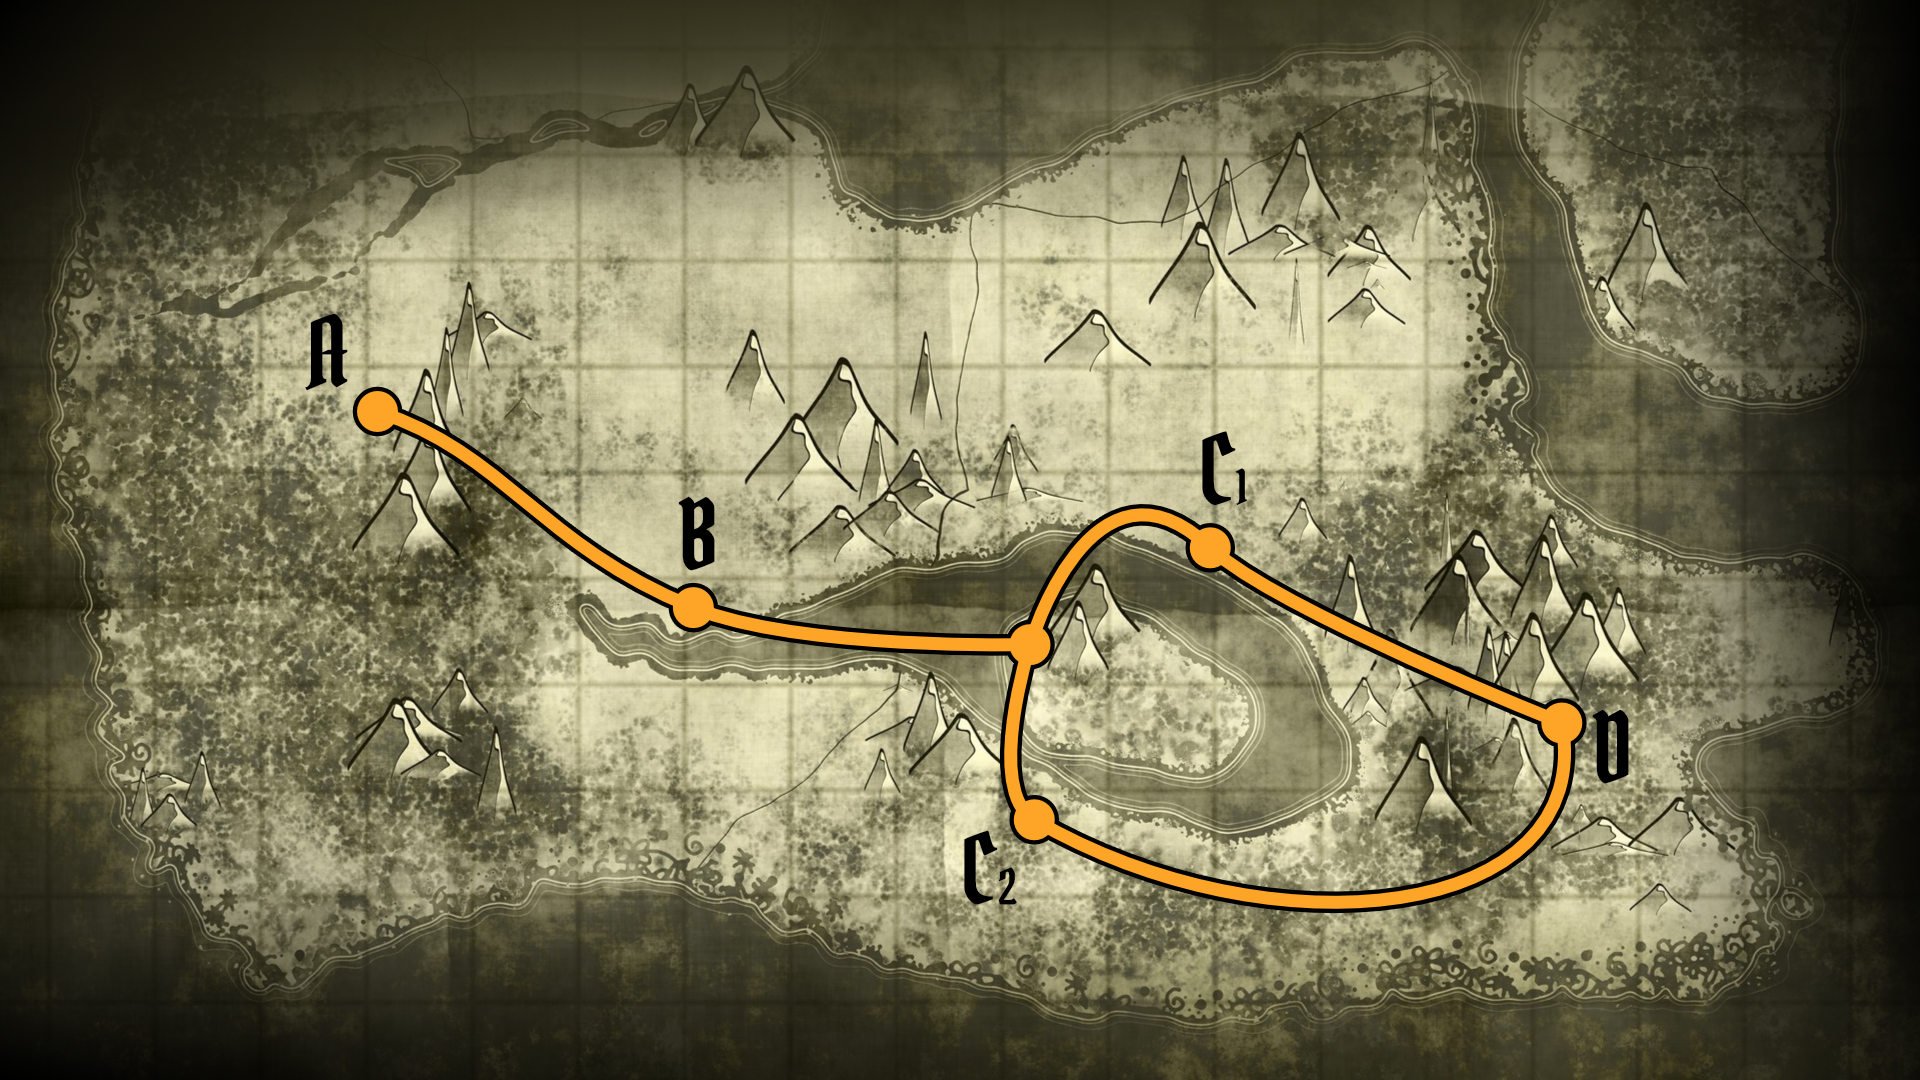 Fantasy world map with an orange route and stops marked as A (the start), B, C1, C2 (a fork), and D (a bottleneck),